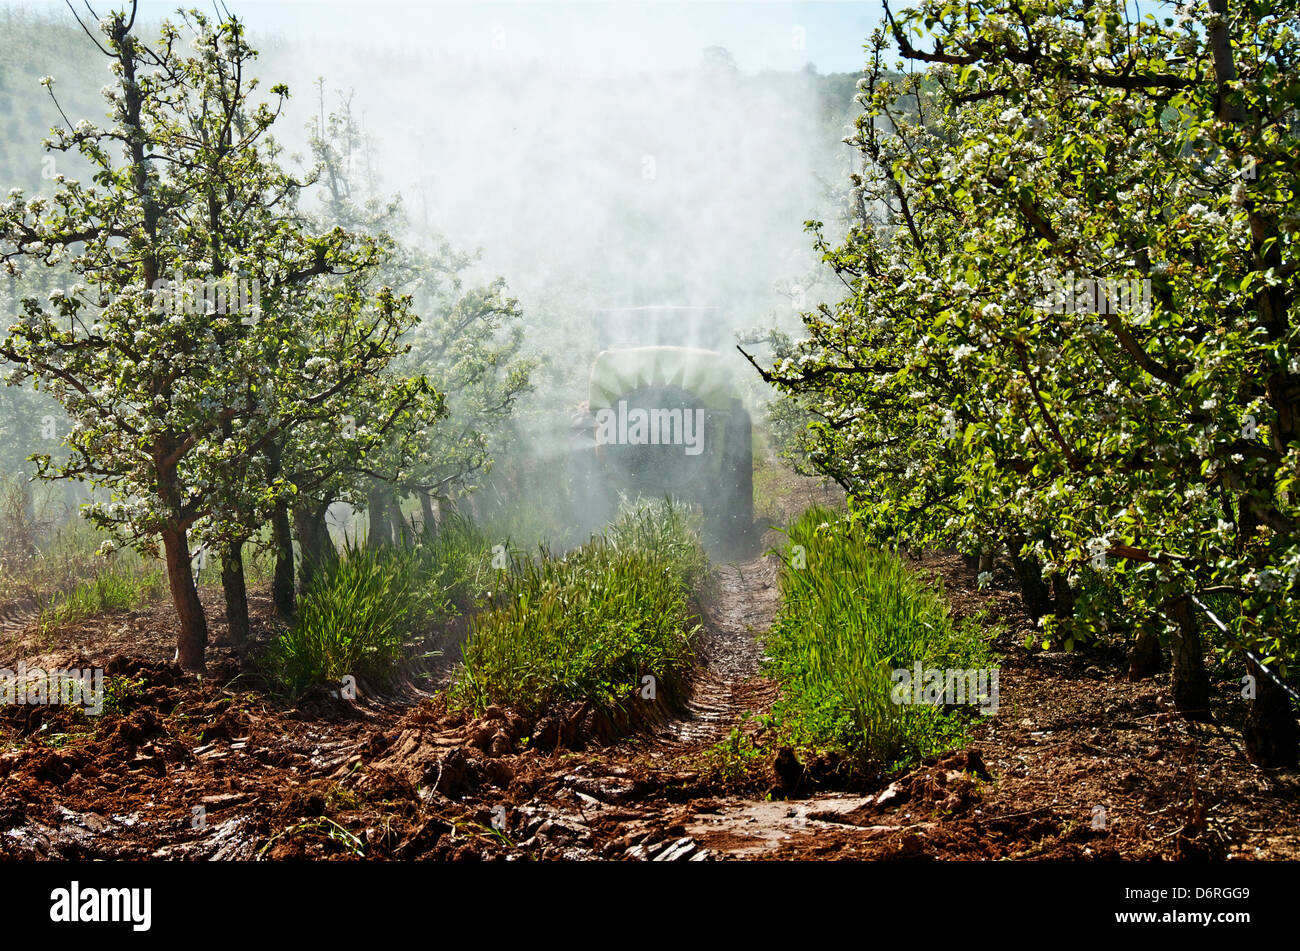 A-Dos-Francos, Portugal, April 2013. Pear Rocha orchards are in bloom. Farmers deal to protect them from pests. Stock Photo